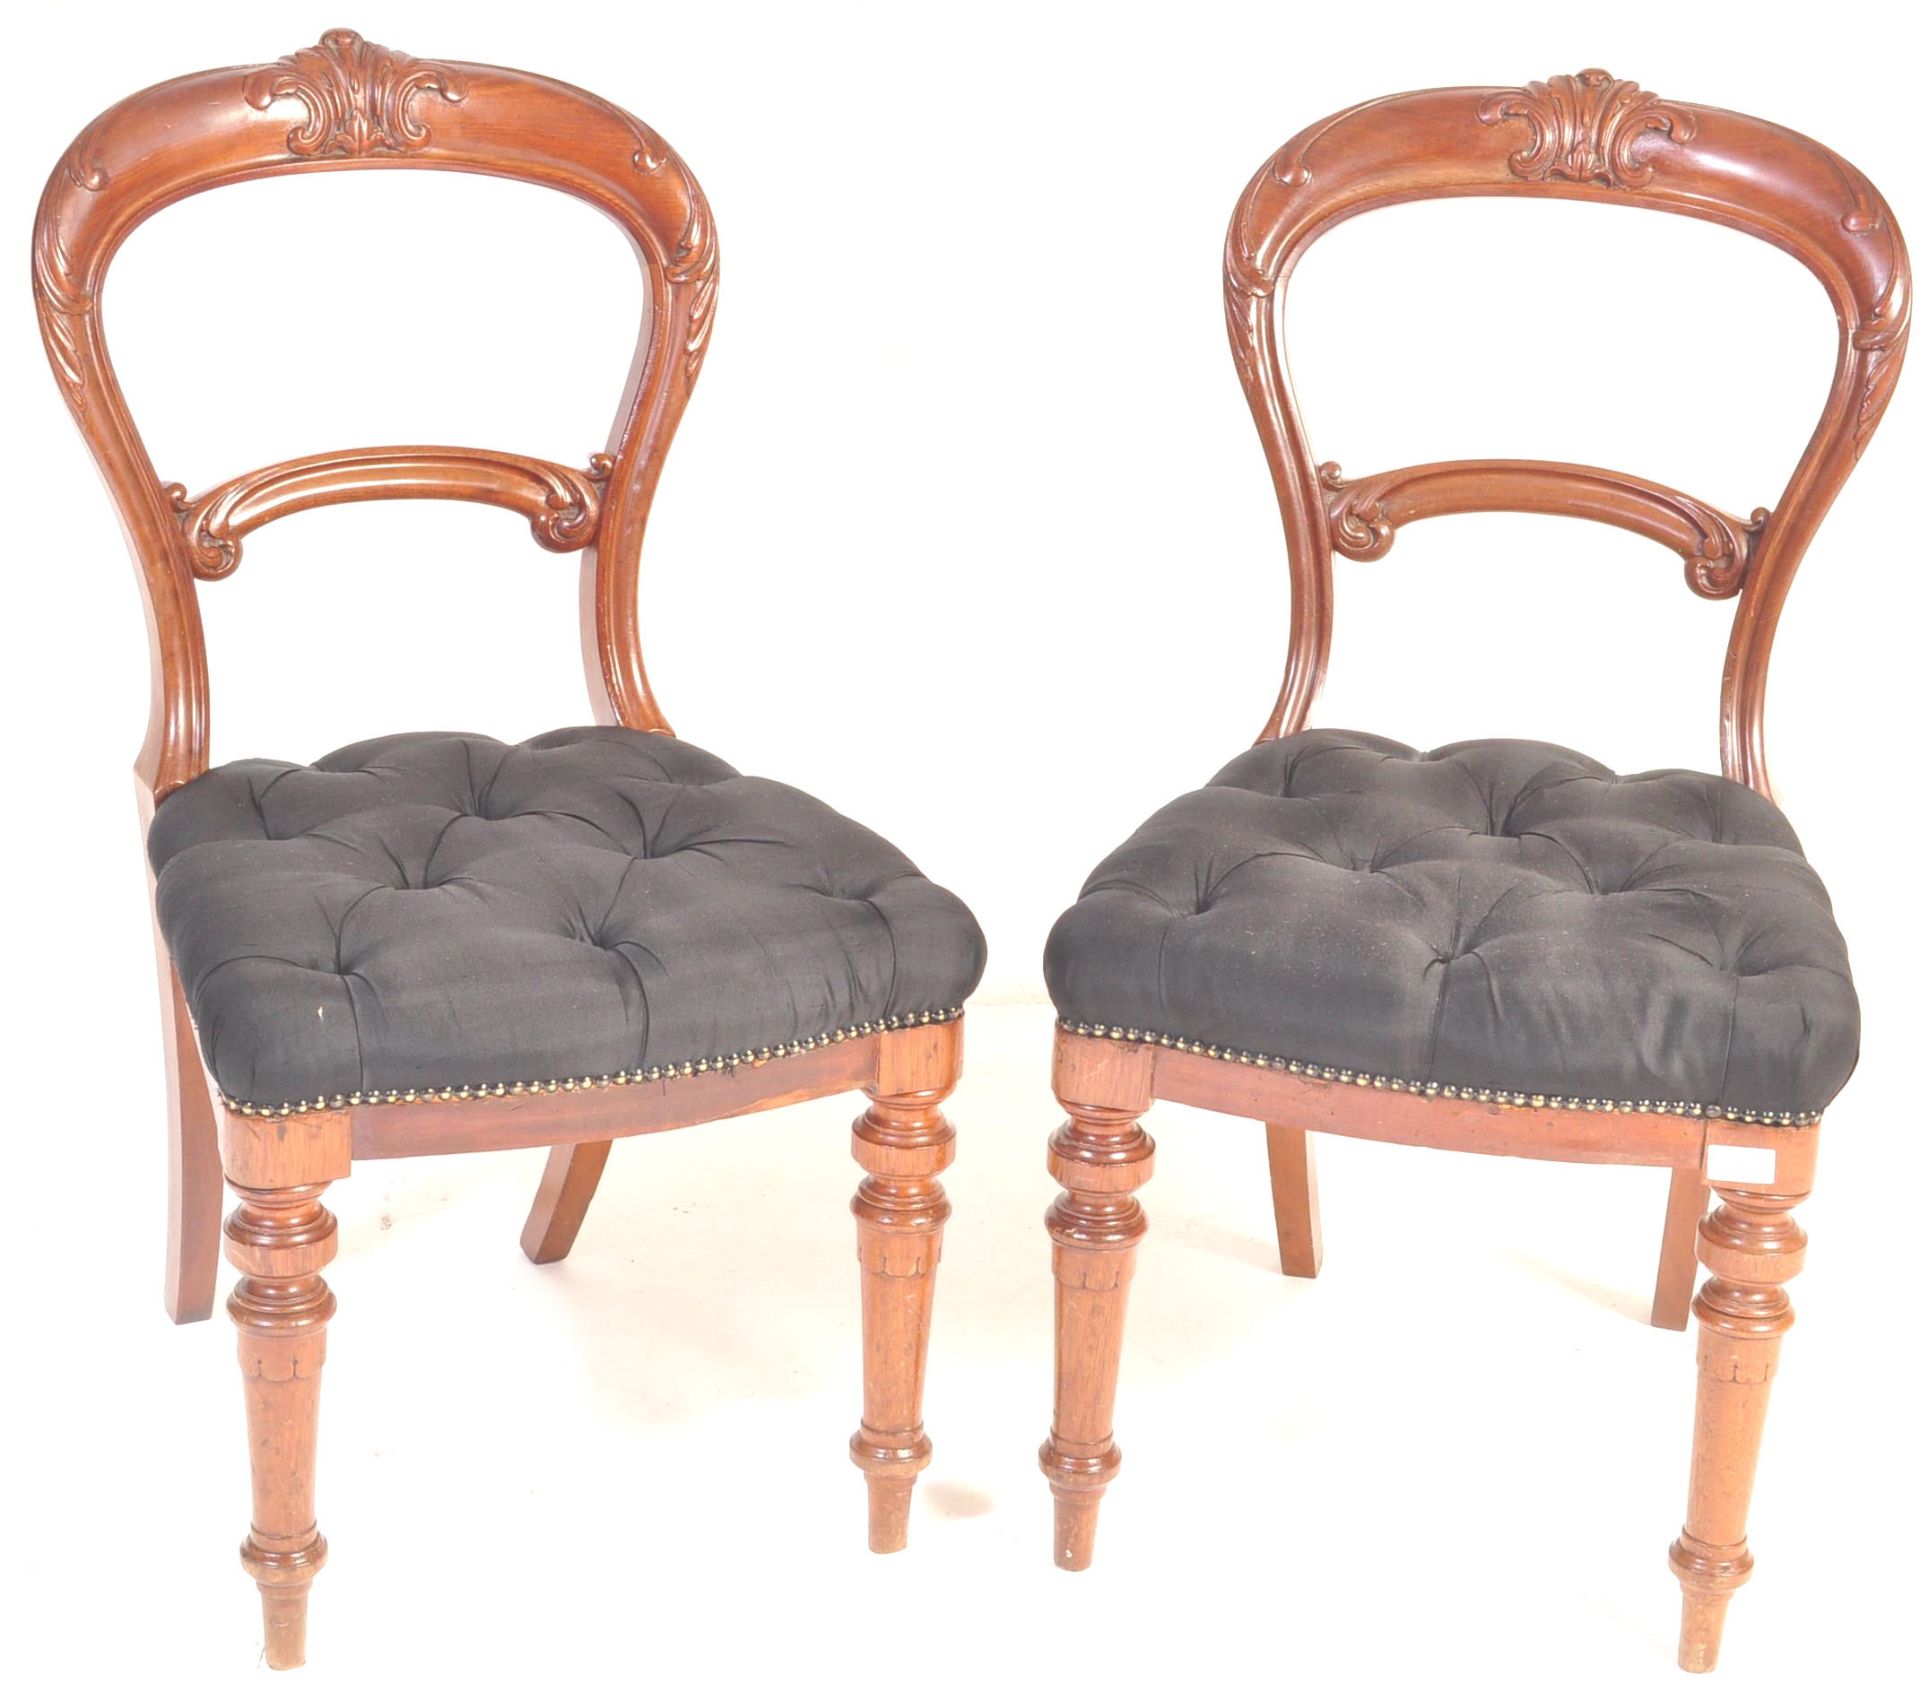 PAIR OF 19TH CENTURY VICTORIAN MAHOGANY DINING CHAIRS